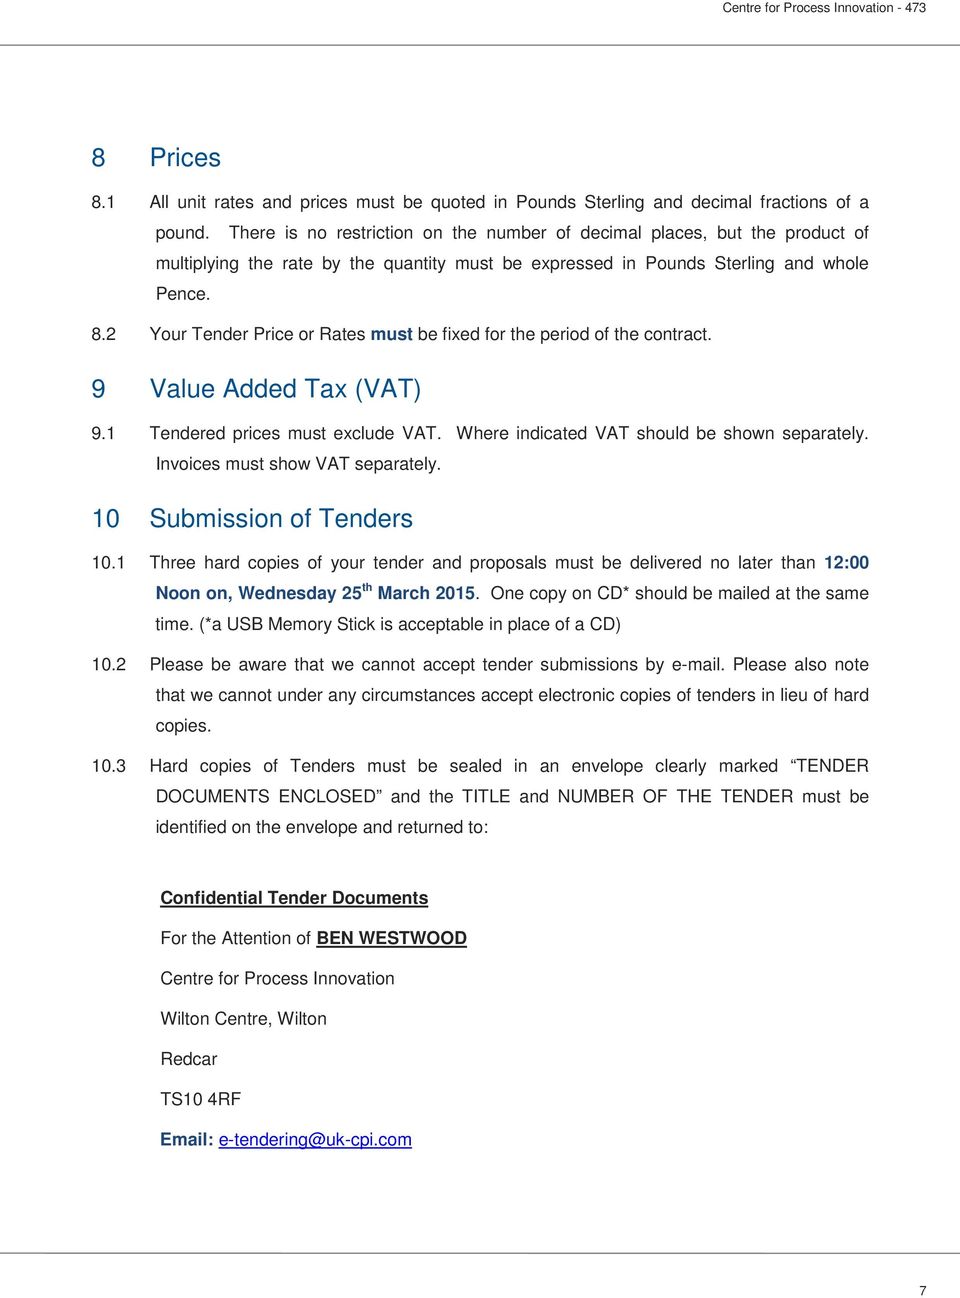 2 Your Tender Price or Rates must be fixed for the period of the contract. 9 Value Added Tax (VAT) 9.1 Tendered prices must exclude VAT. Where indicated VAT should be shown separately.